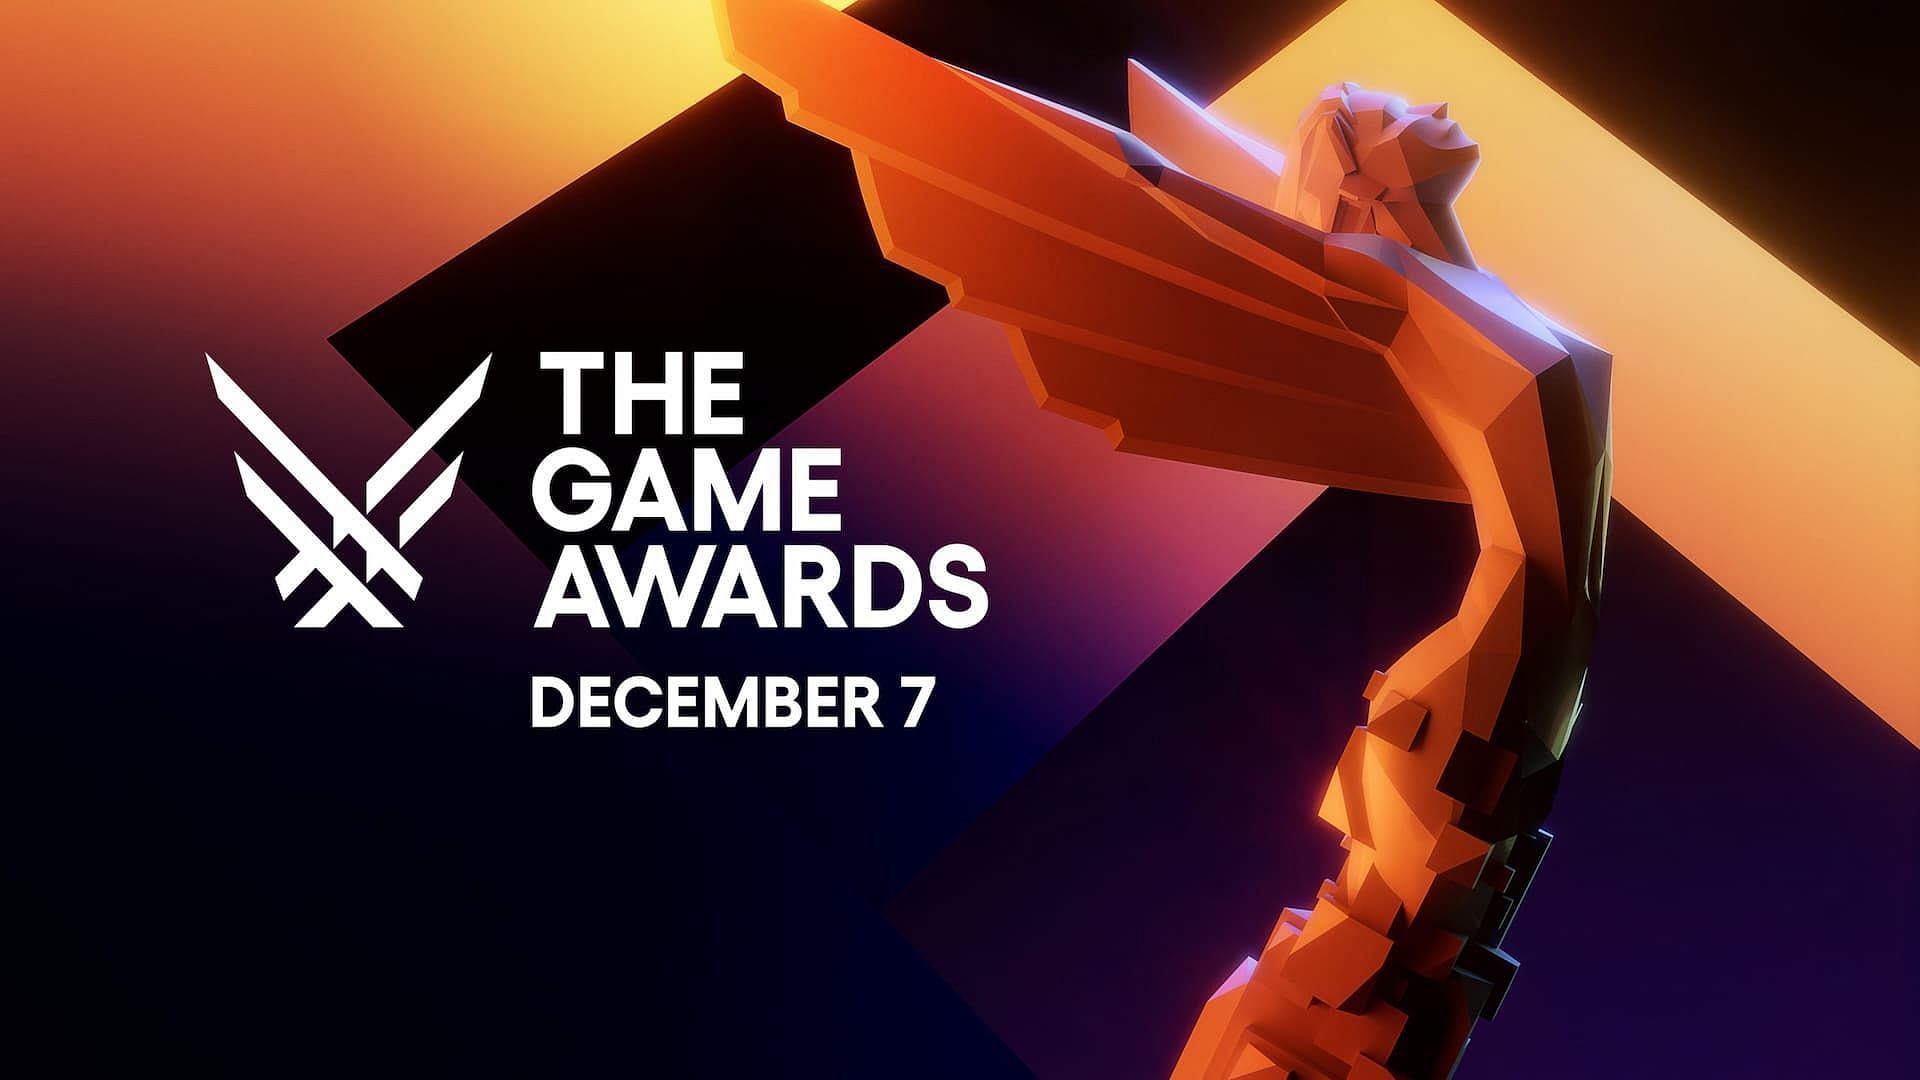 Tag: The game awards 2022 - Neowin